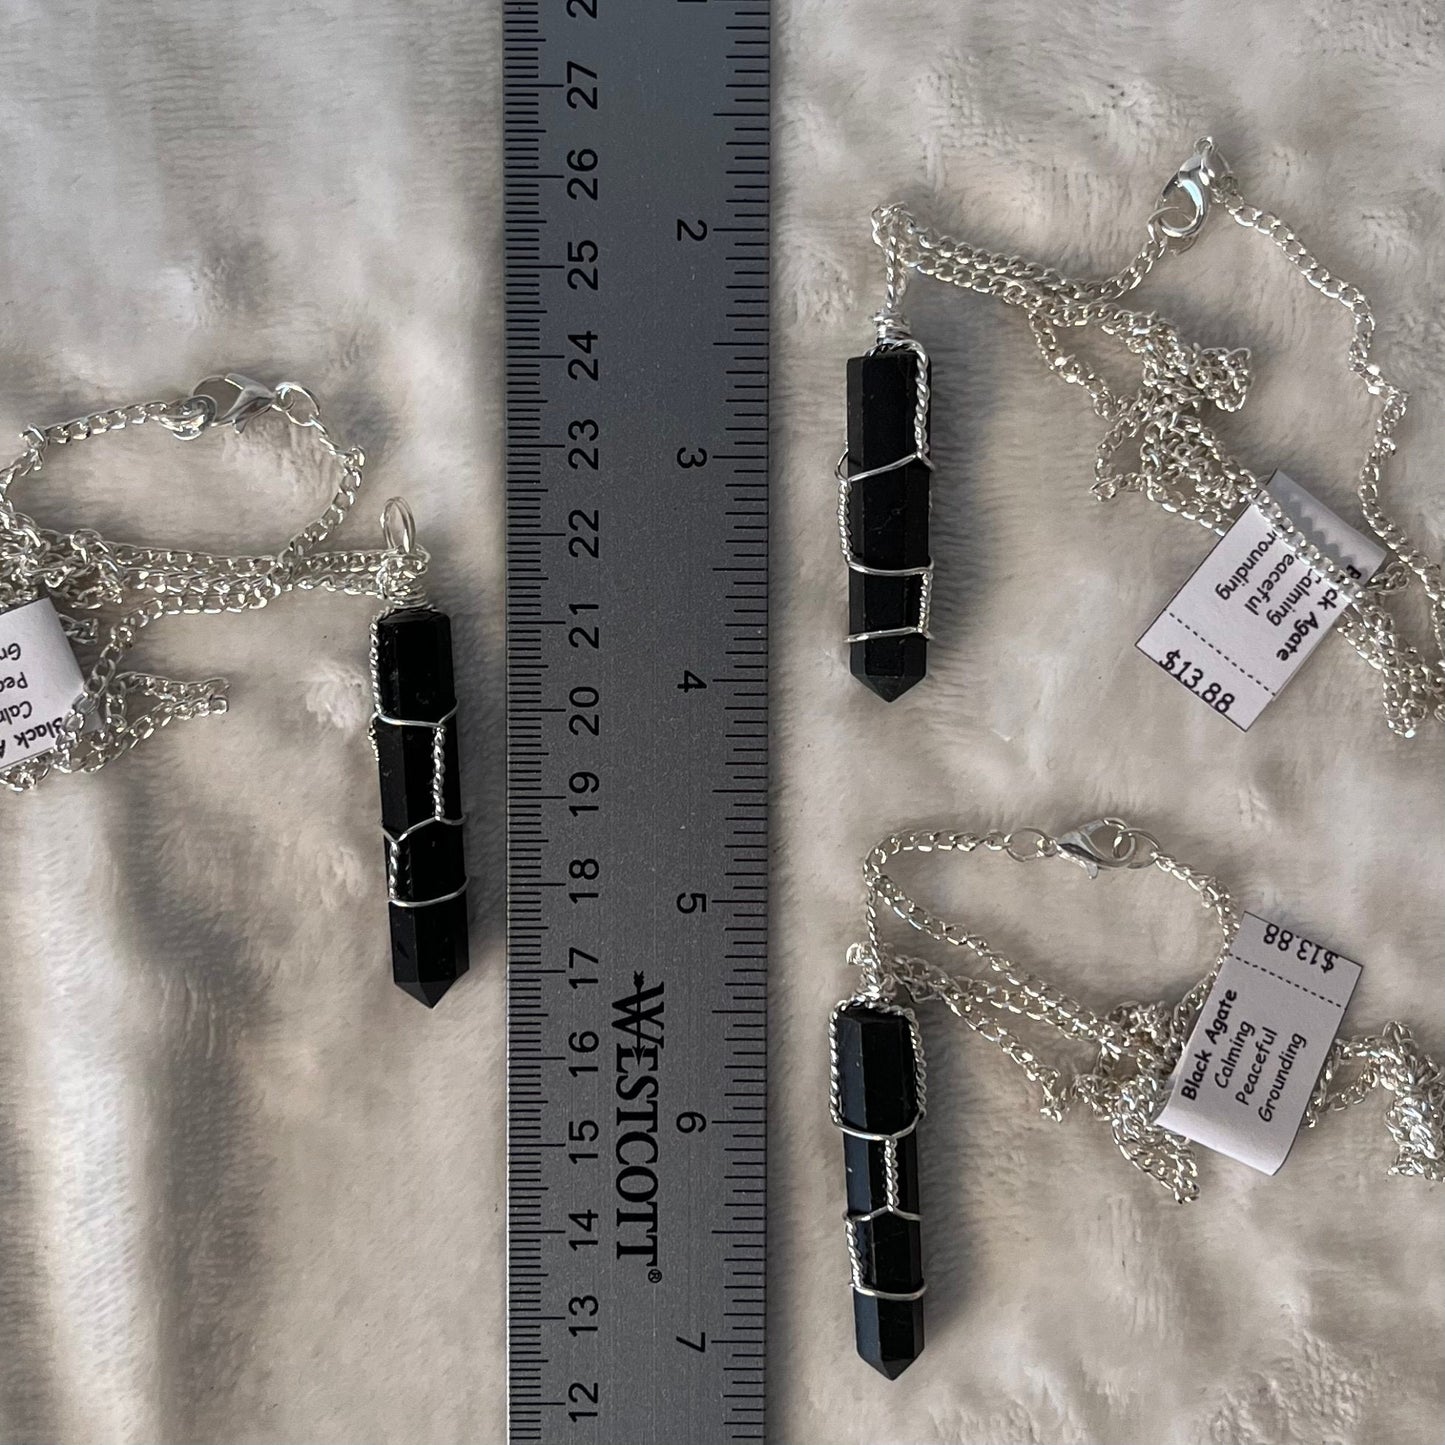 3, 1 1/2" black agate crystal point, handmade, silver wire-wrapped pendant attached to 20 inch silver chains, displayes next to a ruler.